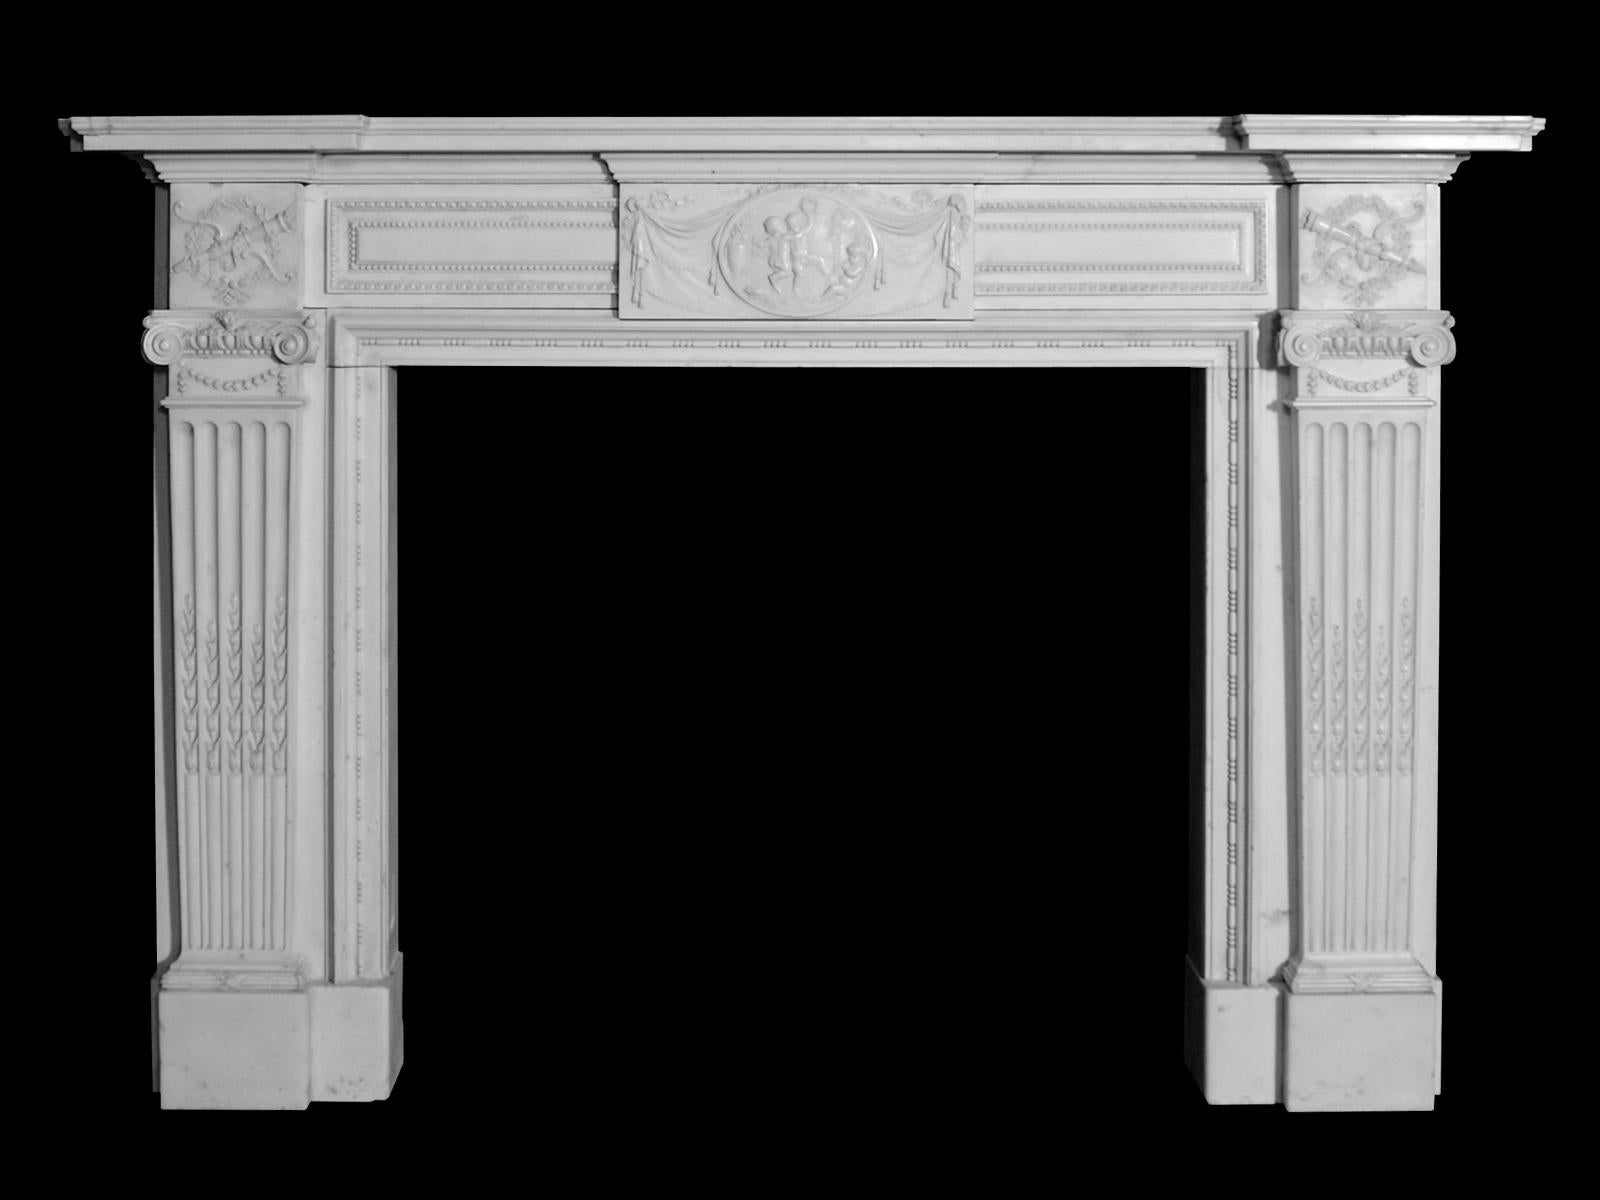 A 19th century Regency style fireplace, executed in Italian statuary white marble, having fluted pilaster jambs inset with bell husks terminating beneath ionic capitals. The end blockings of finely carved garland, quiver and arrows. The centre